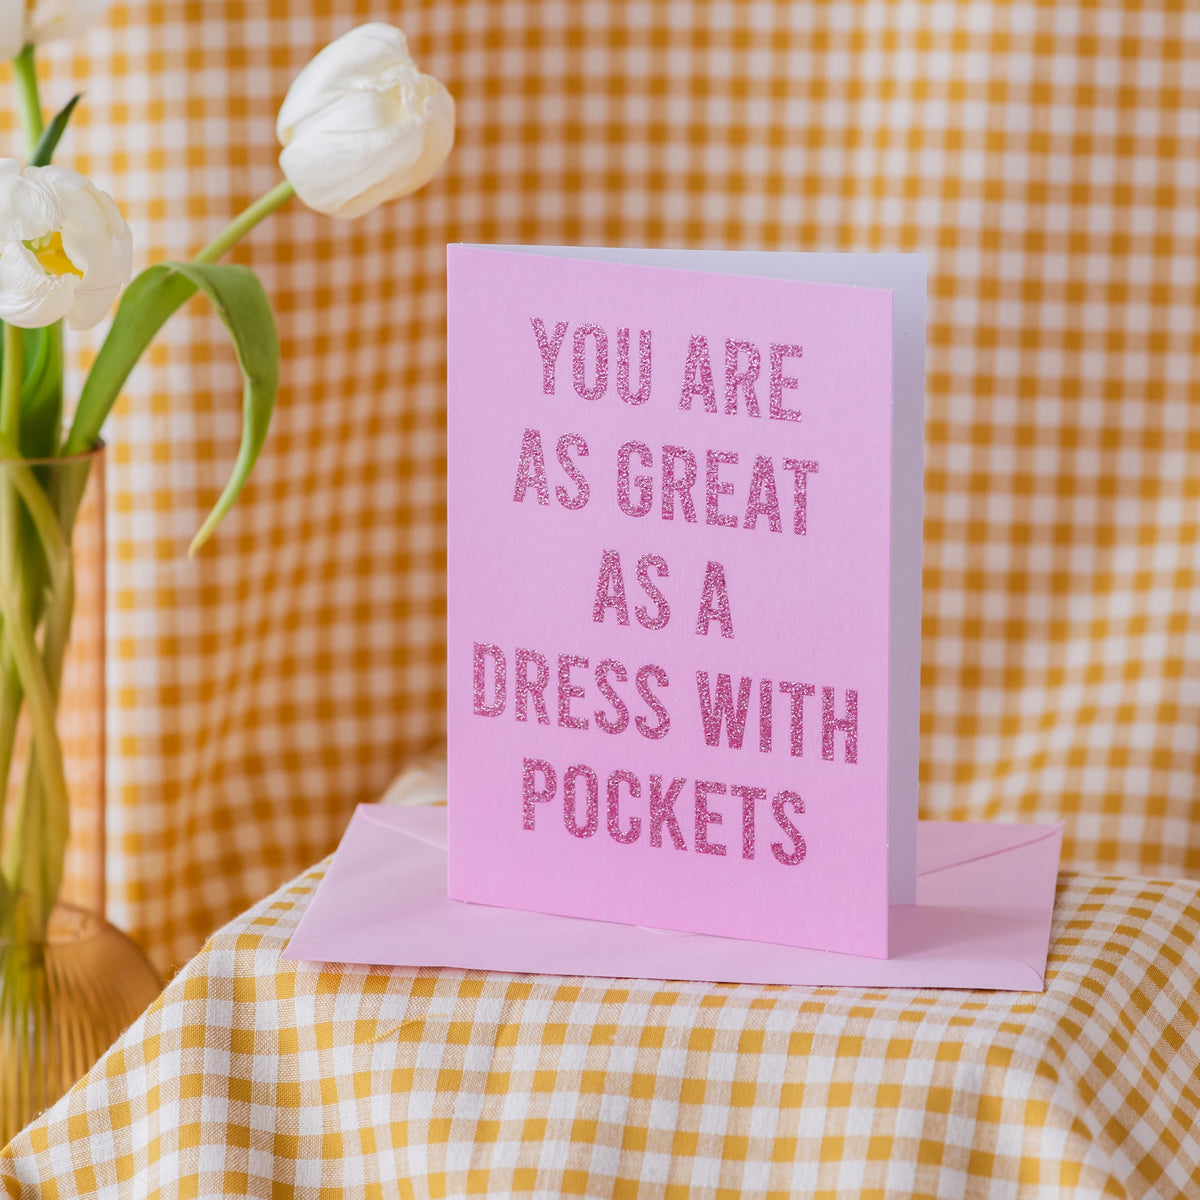 'You Are As Great As A Dress With Pockets' Greetings Card - Biodegradable Glitter